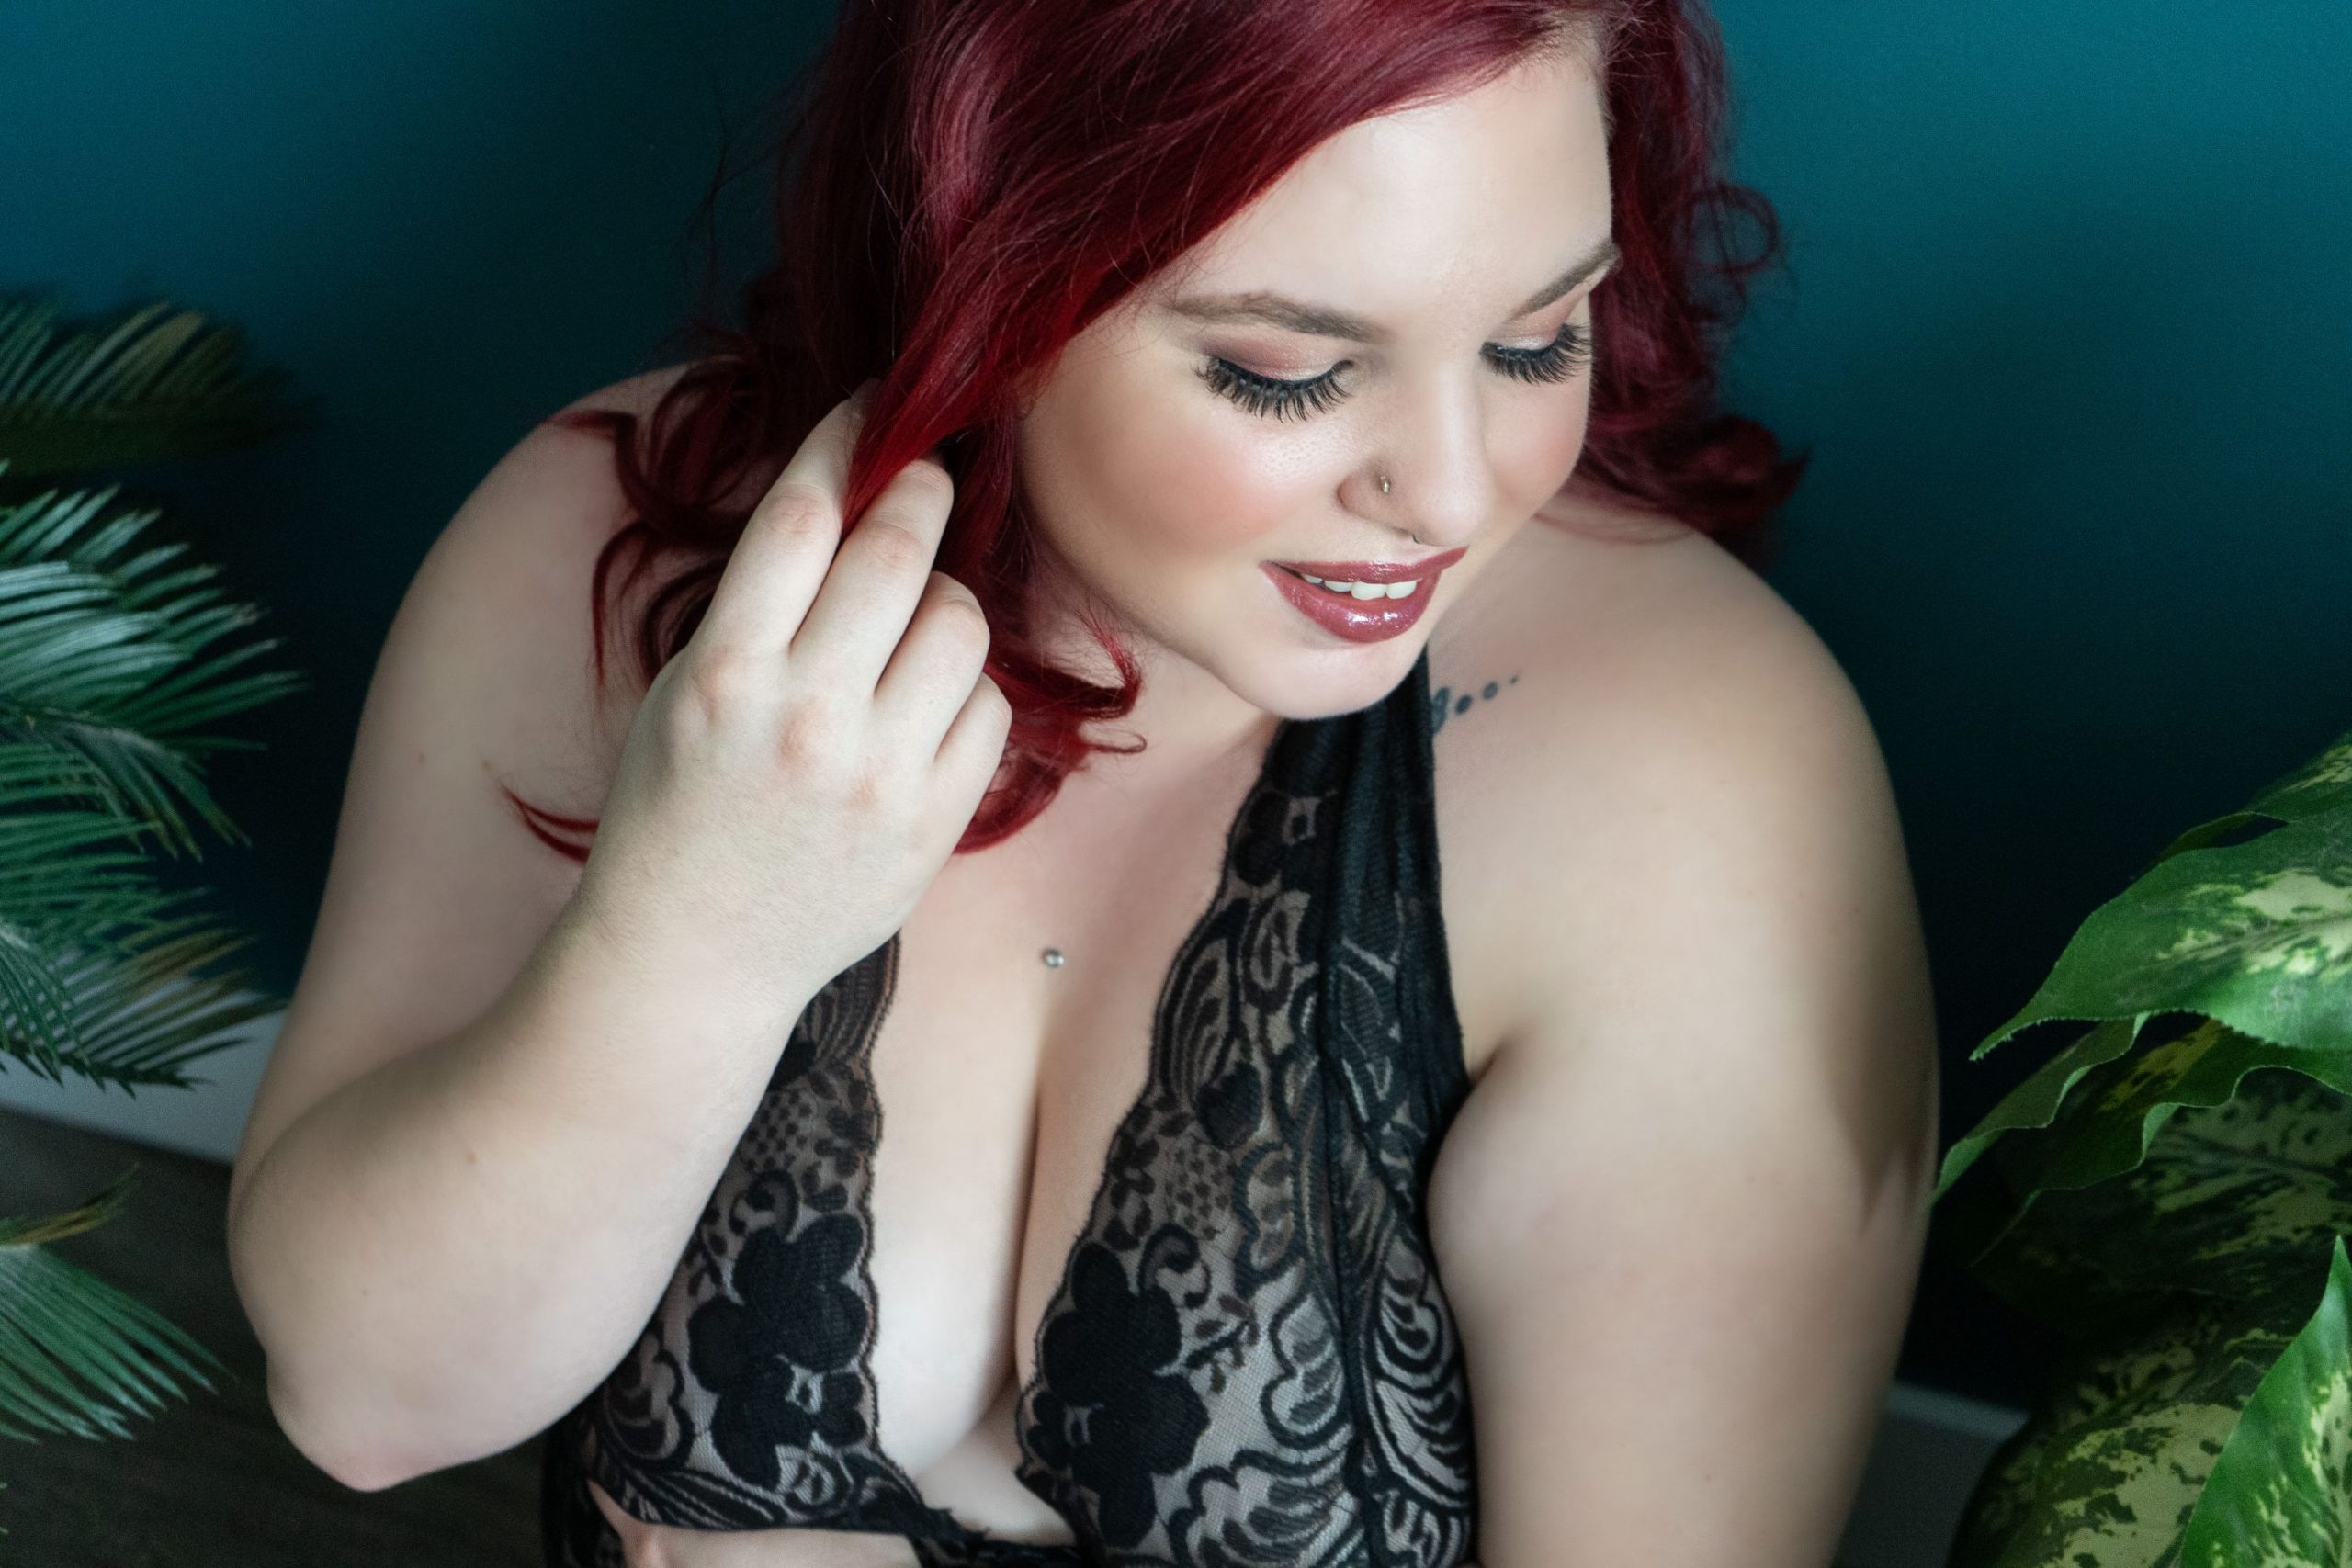 curtis caudill share plus size red head photos